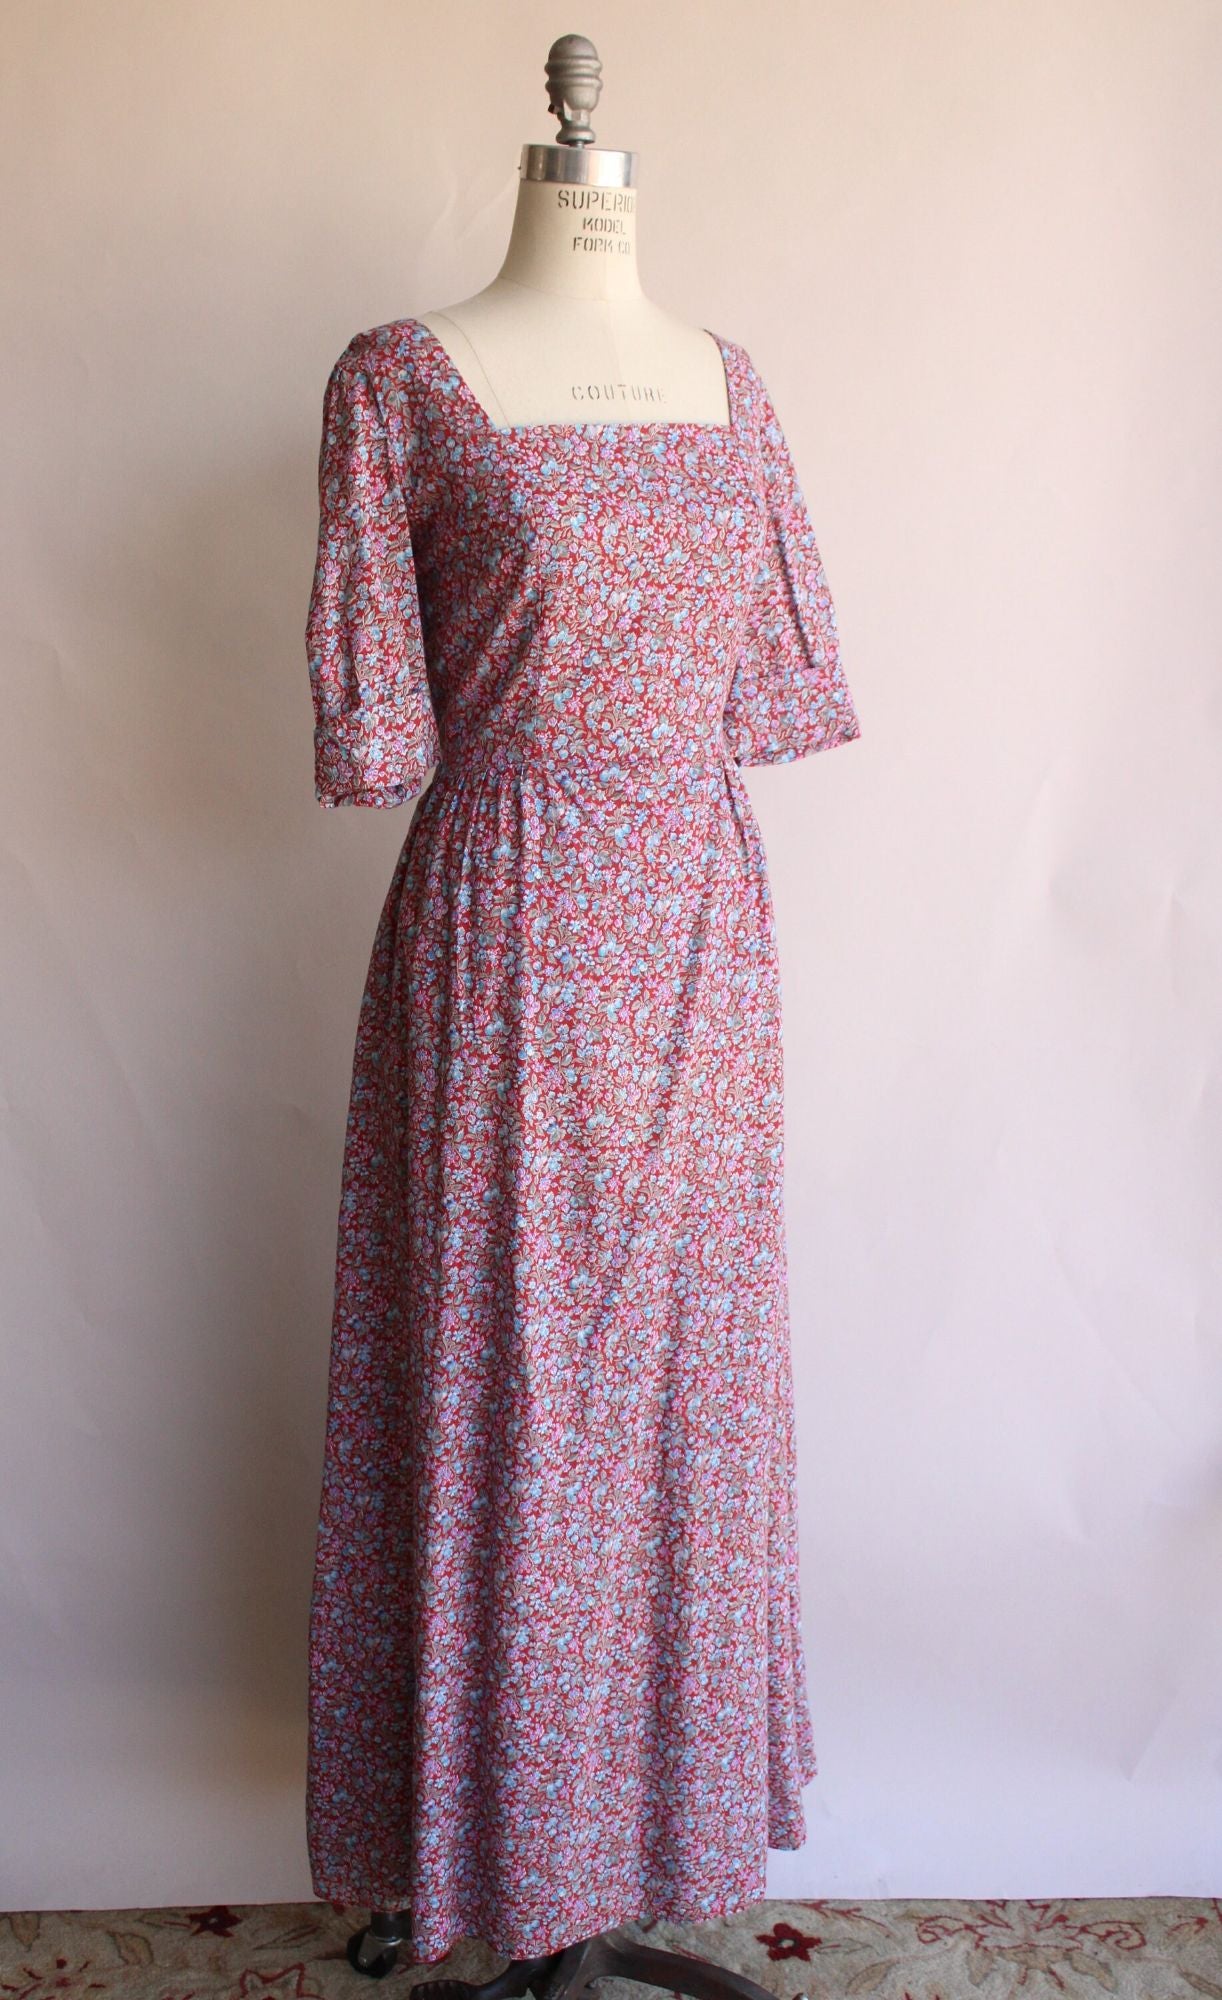 Vintage 1970s 1980s Victorian Day Dress Costume